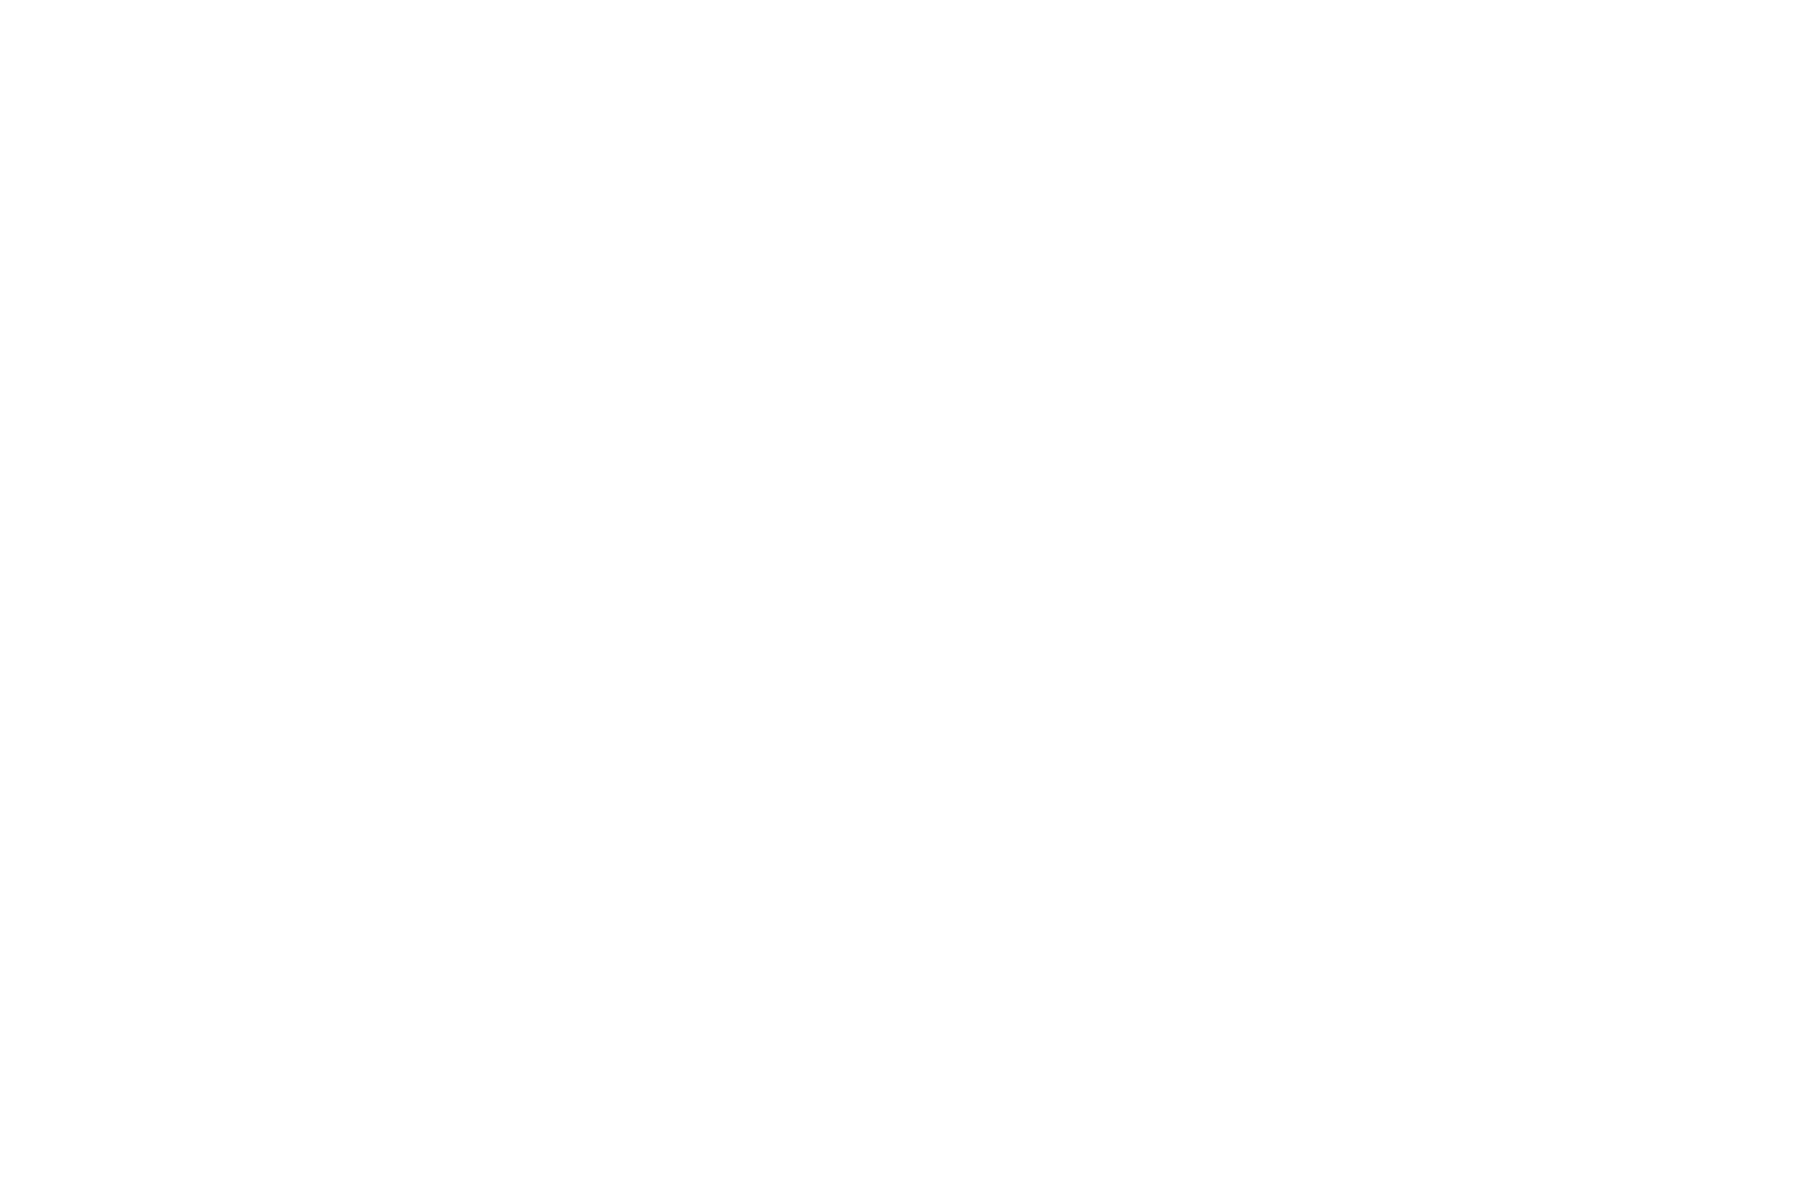 The Fisher King logo